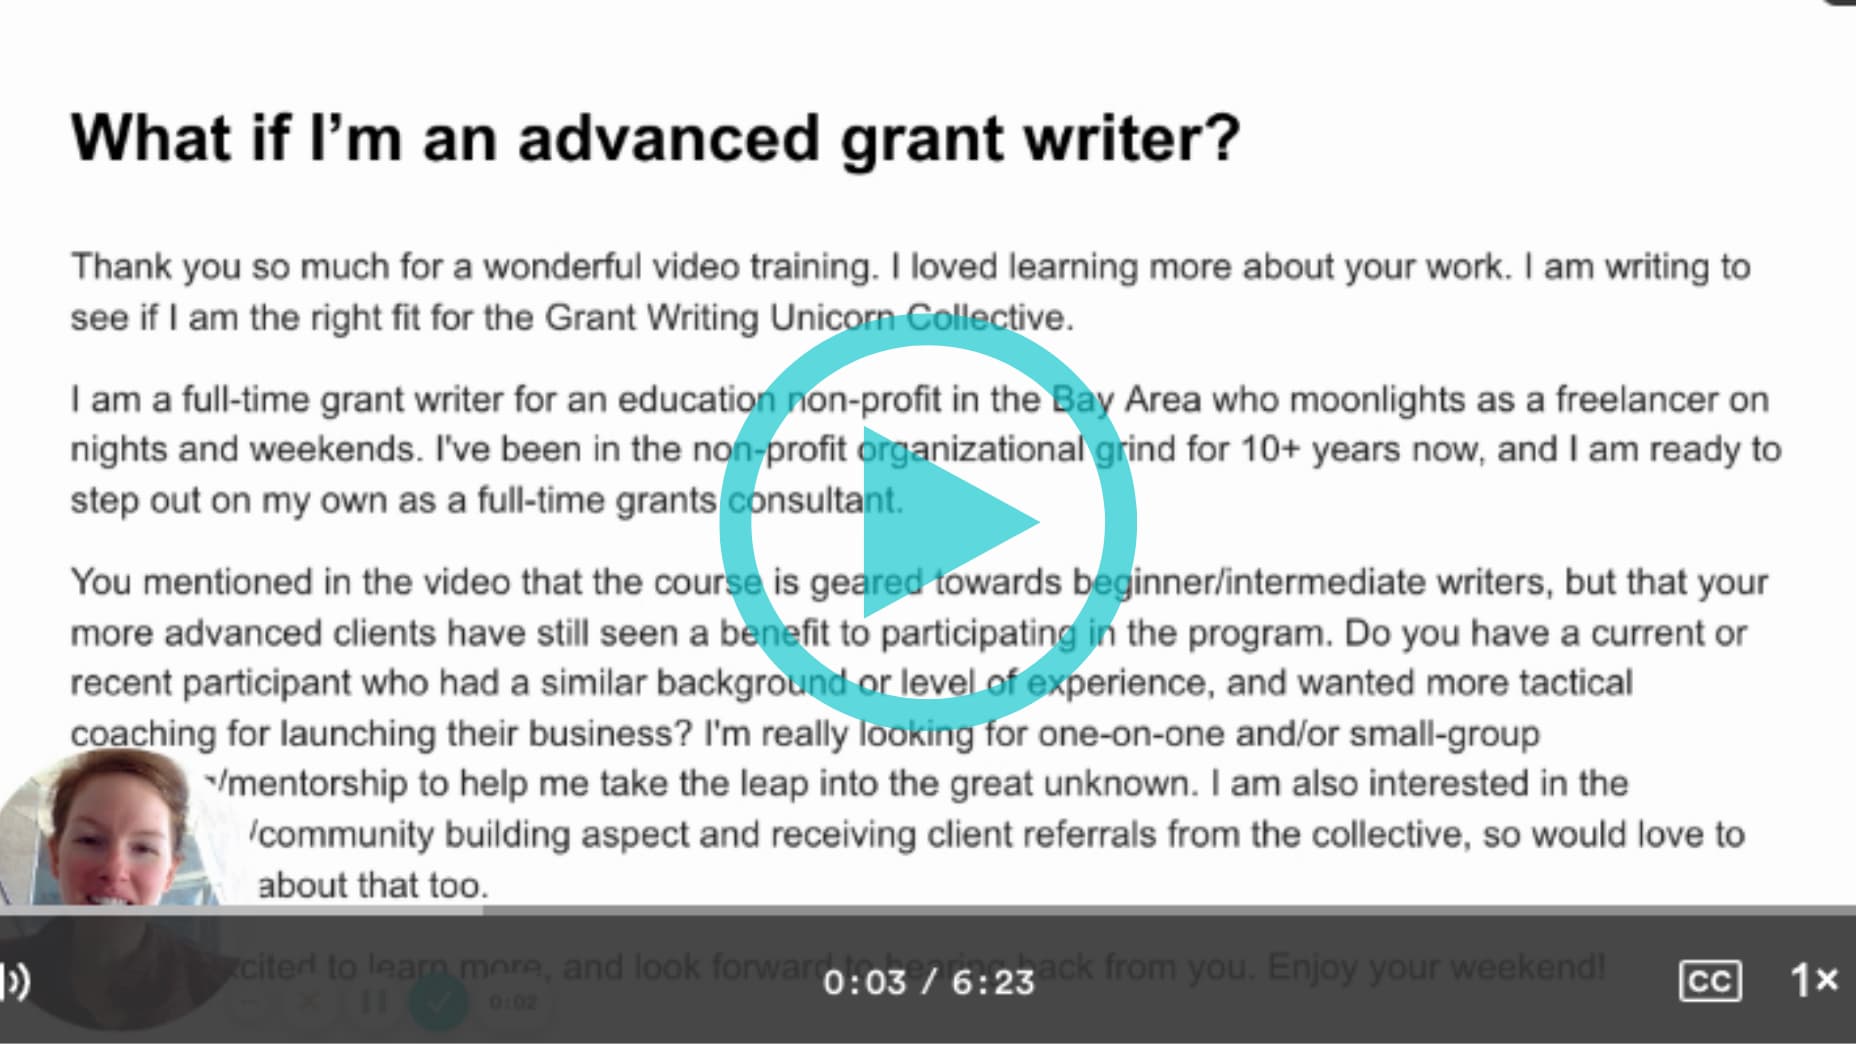 Program for new and advanced grant writers